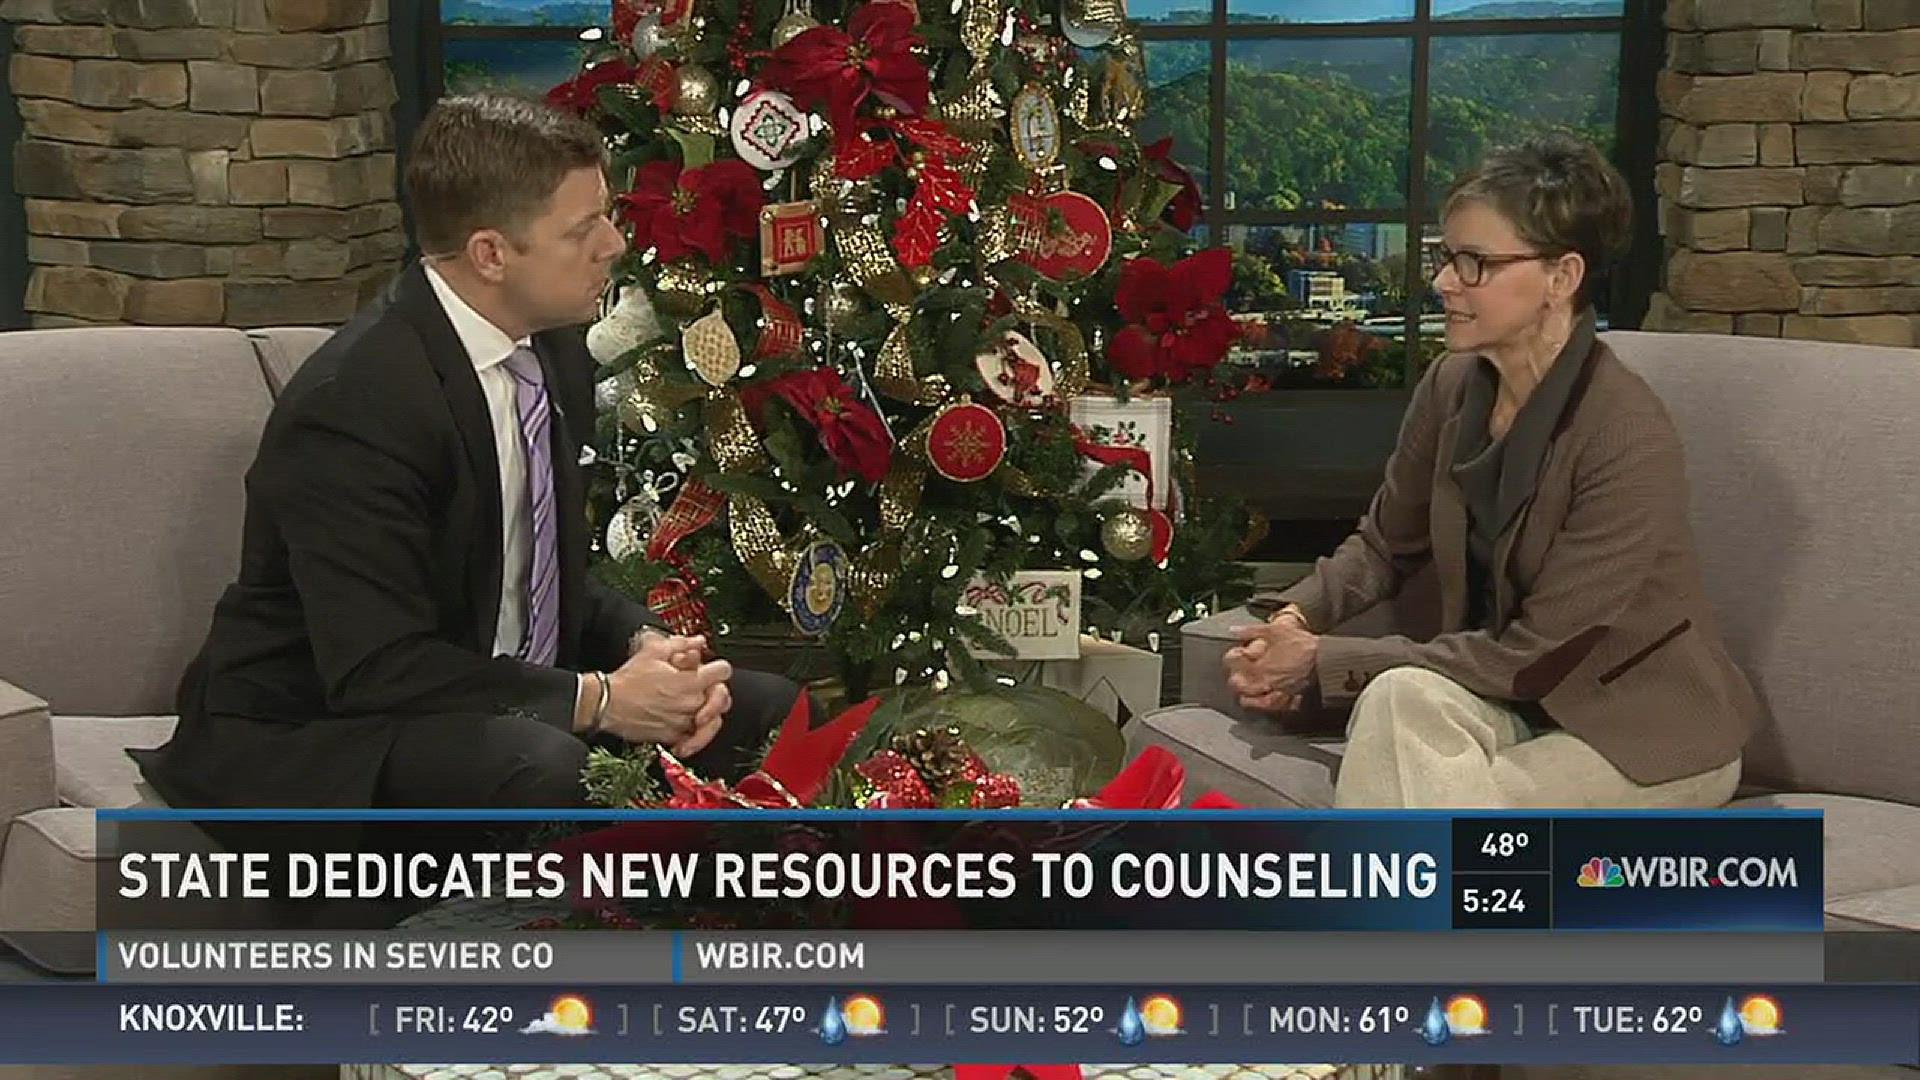 Dec. 29, 2016: Dr. Candace Allen from the Helen Ross McNabb Center discusses the mental health resources available for people following the wildfires in Sevier County.